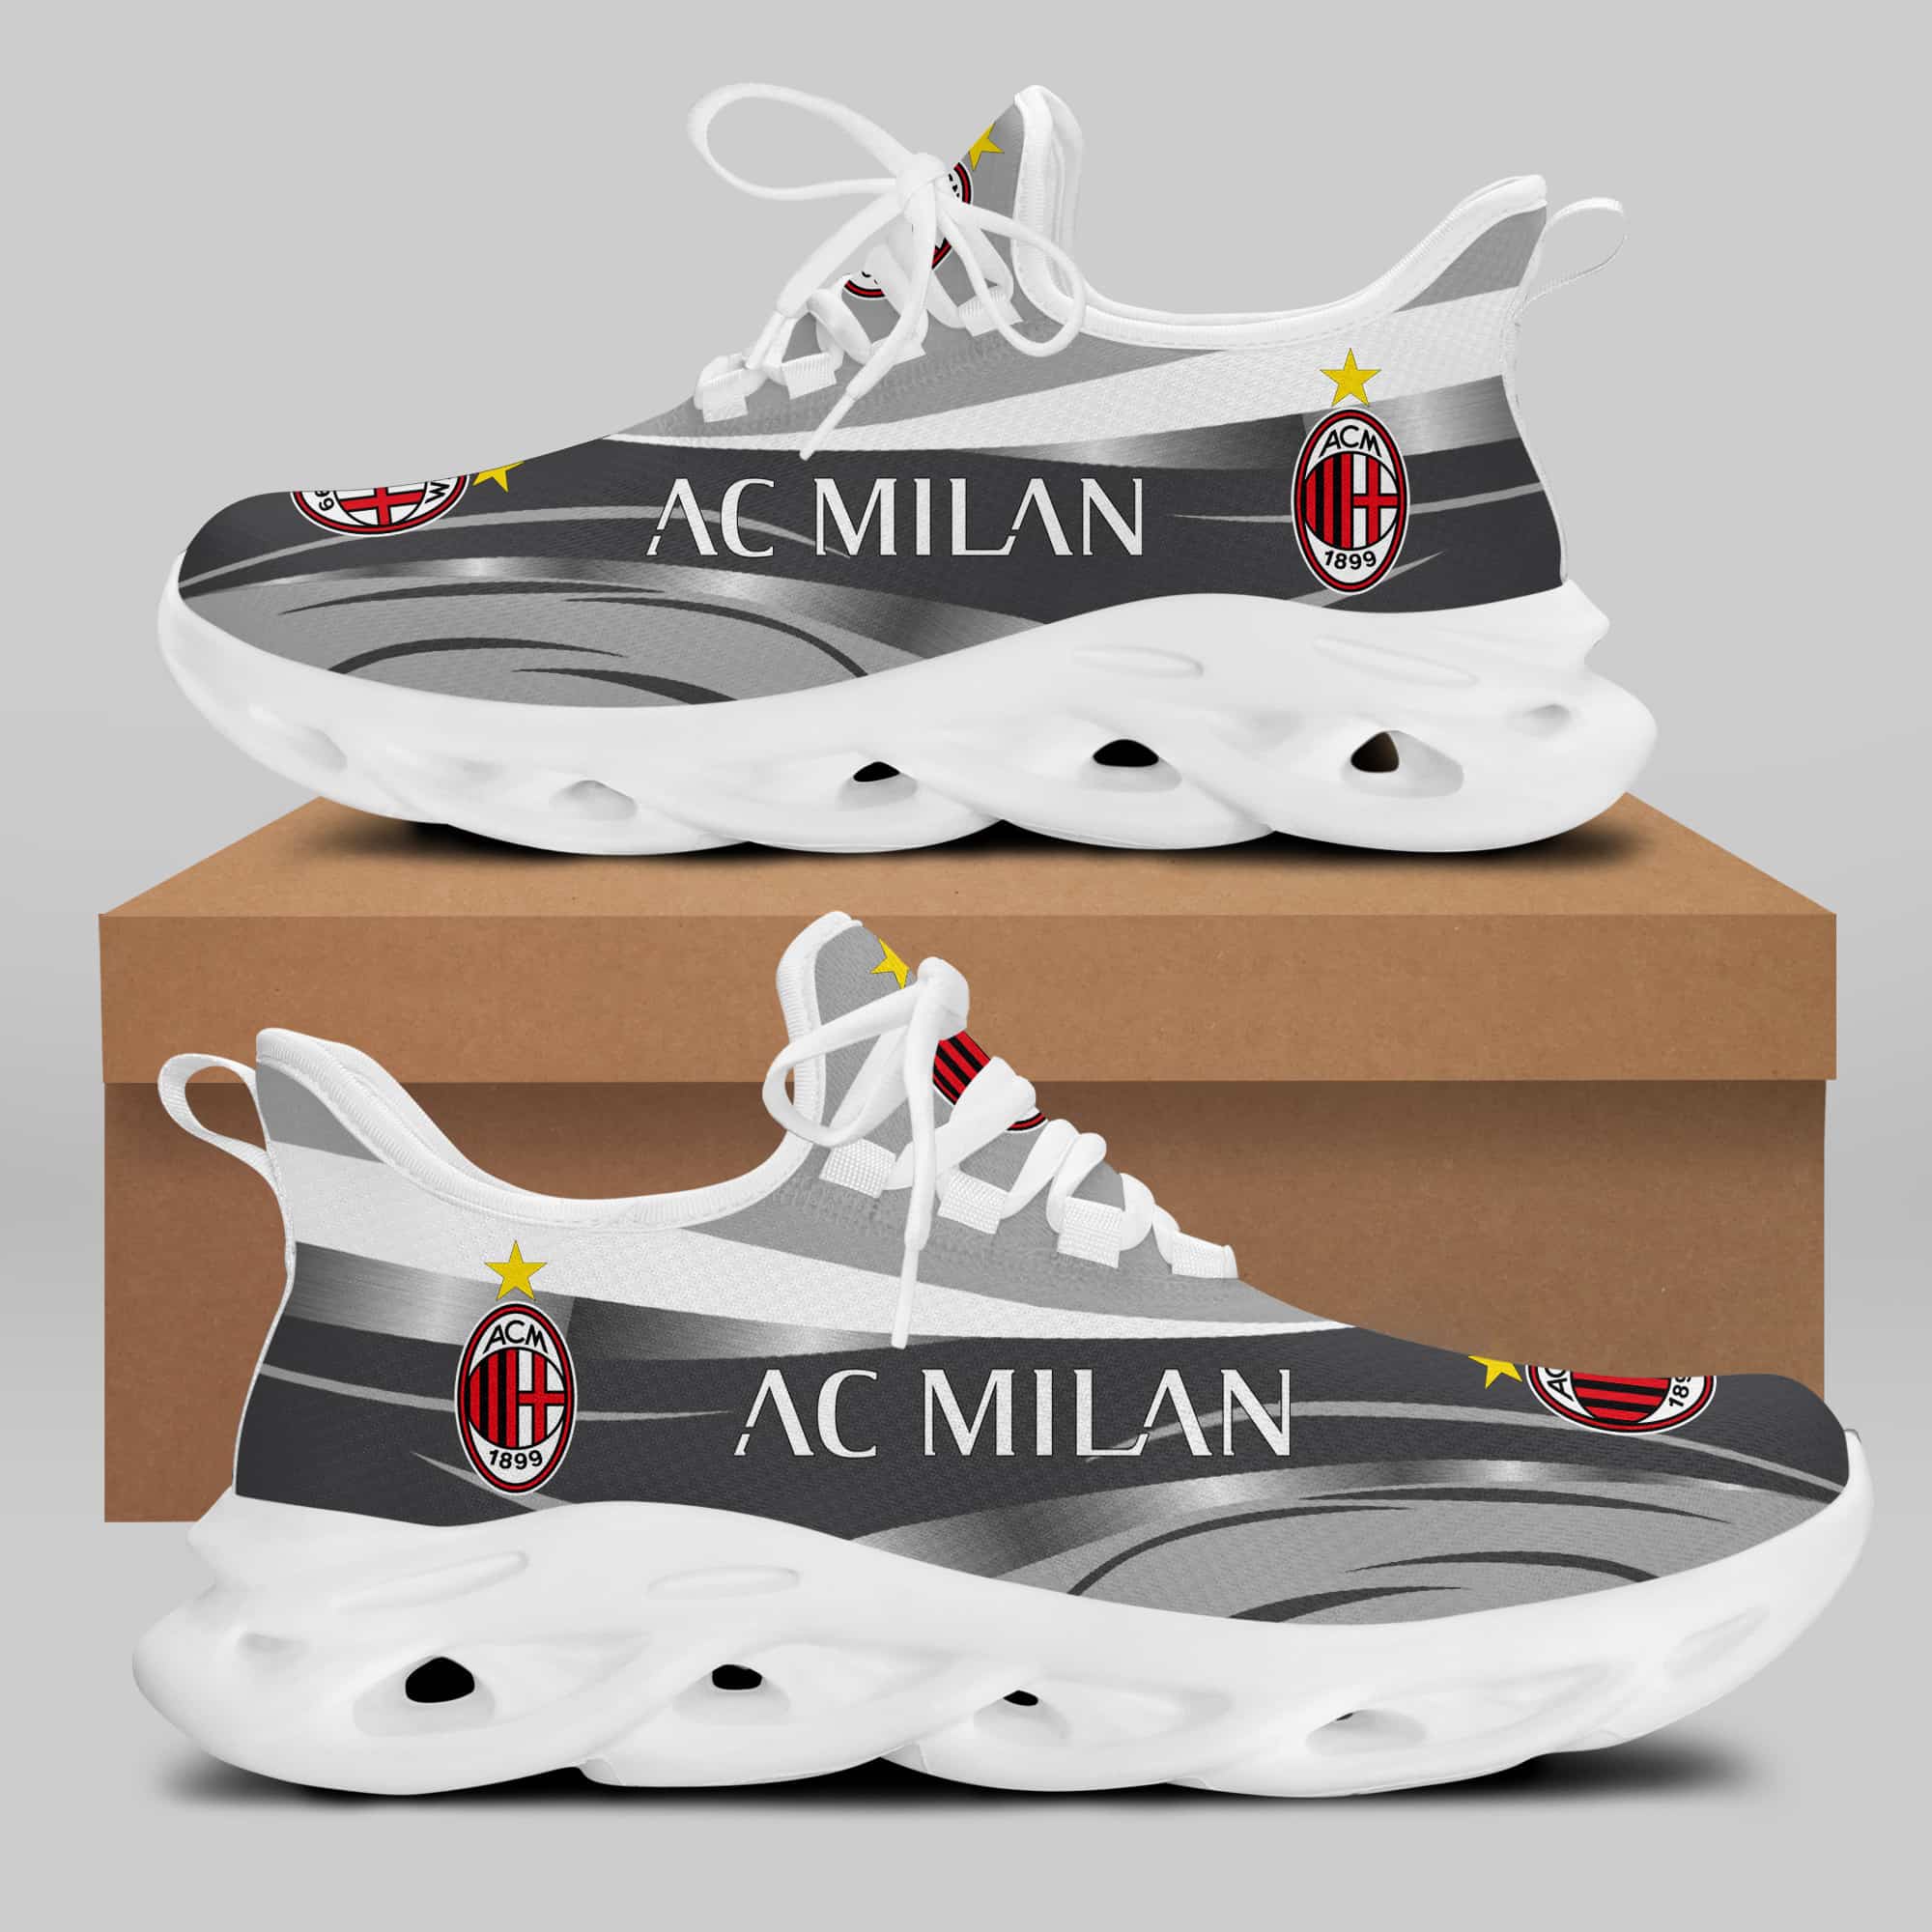 Ac Milan Running Shoes Max Soul Shoes Sneakers Ver 28 1